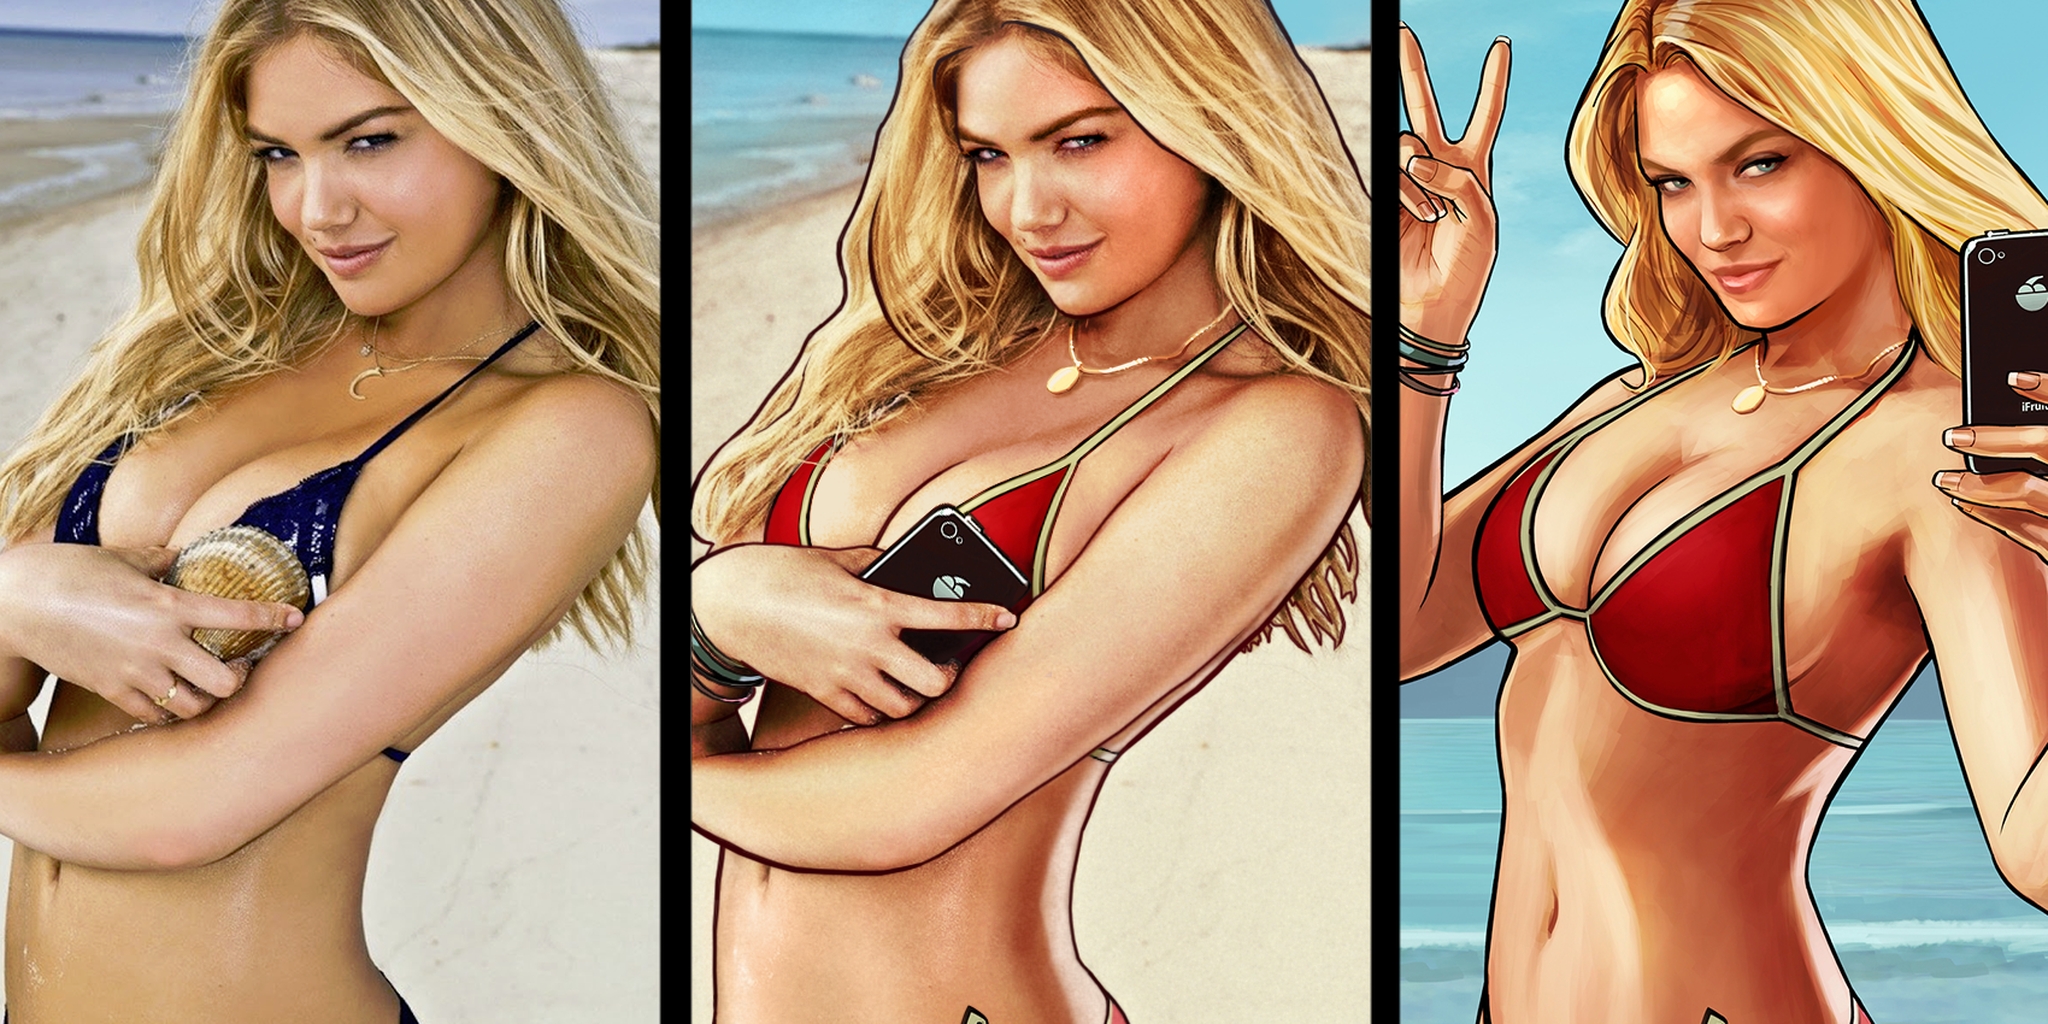 Thats not Kate Upton in the Grand Theft Auto V ads—its this model image